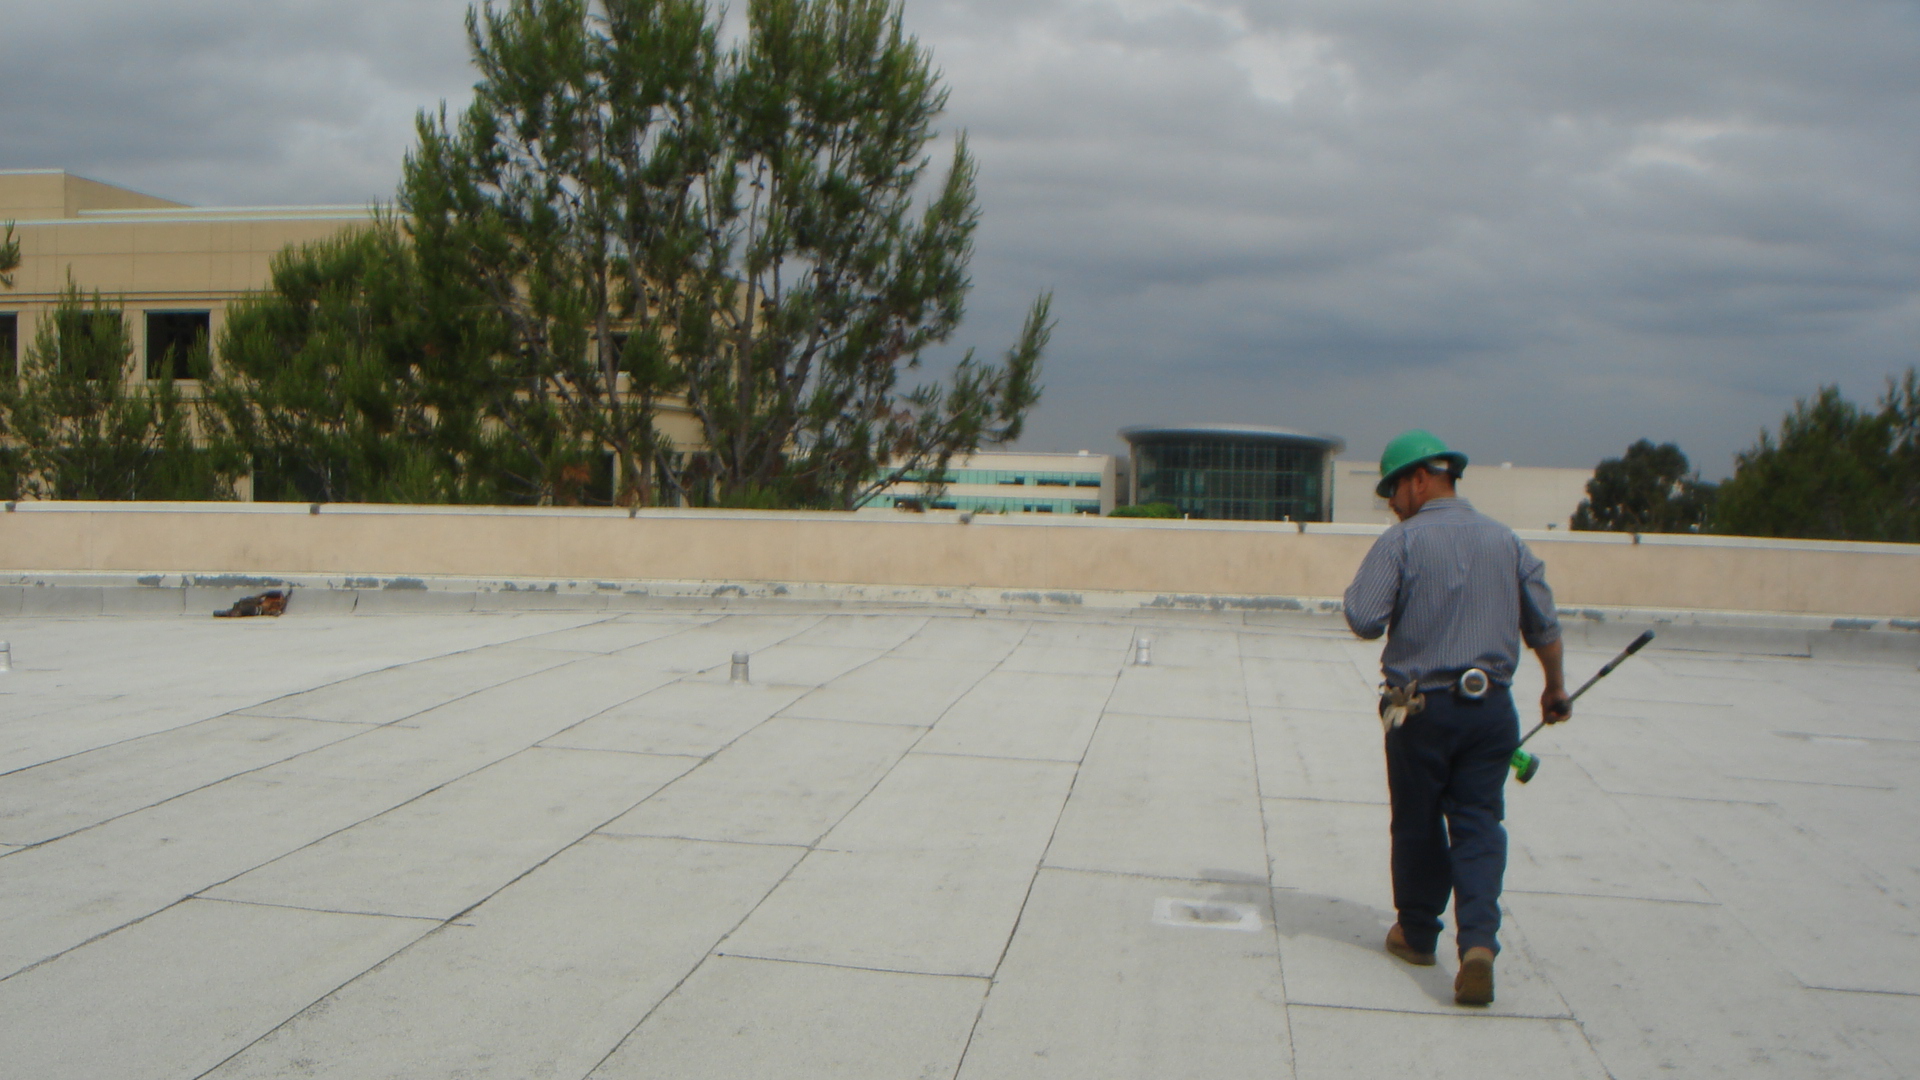 Commercial and Industrial Roof Inspections | Commercial and Industrial Roof Inspections in California | Commercial and Industrial Roof Inspections in Nevada | Commercial and Industrial Roof Inspections in Arizona